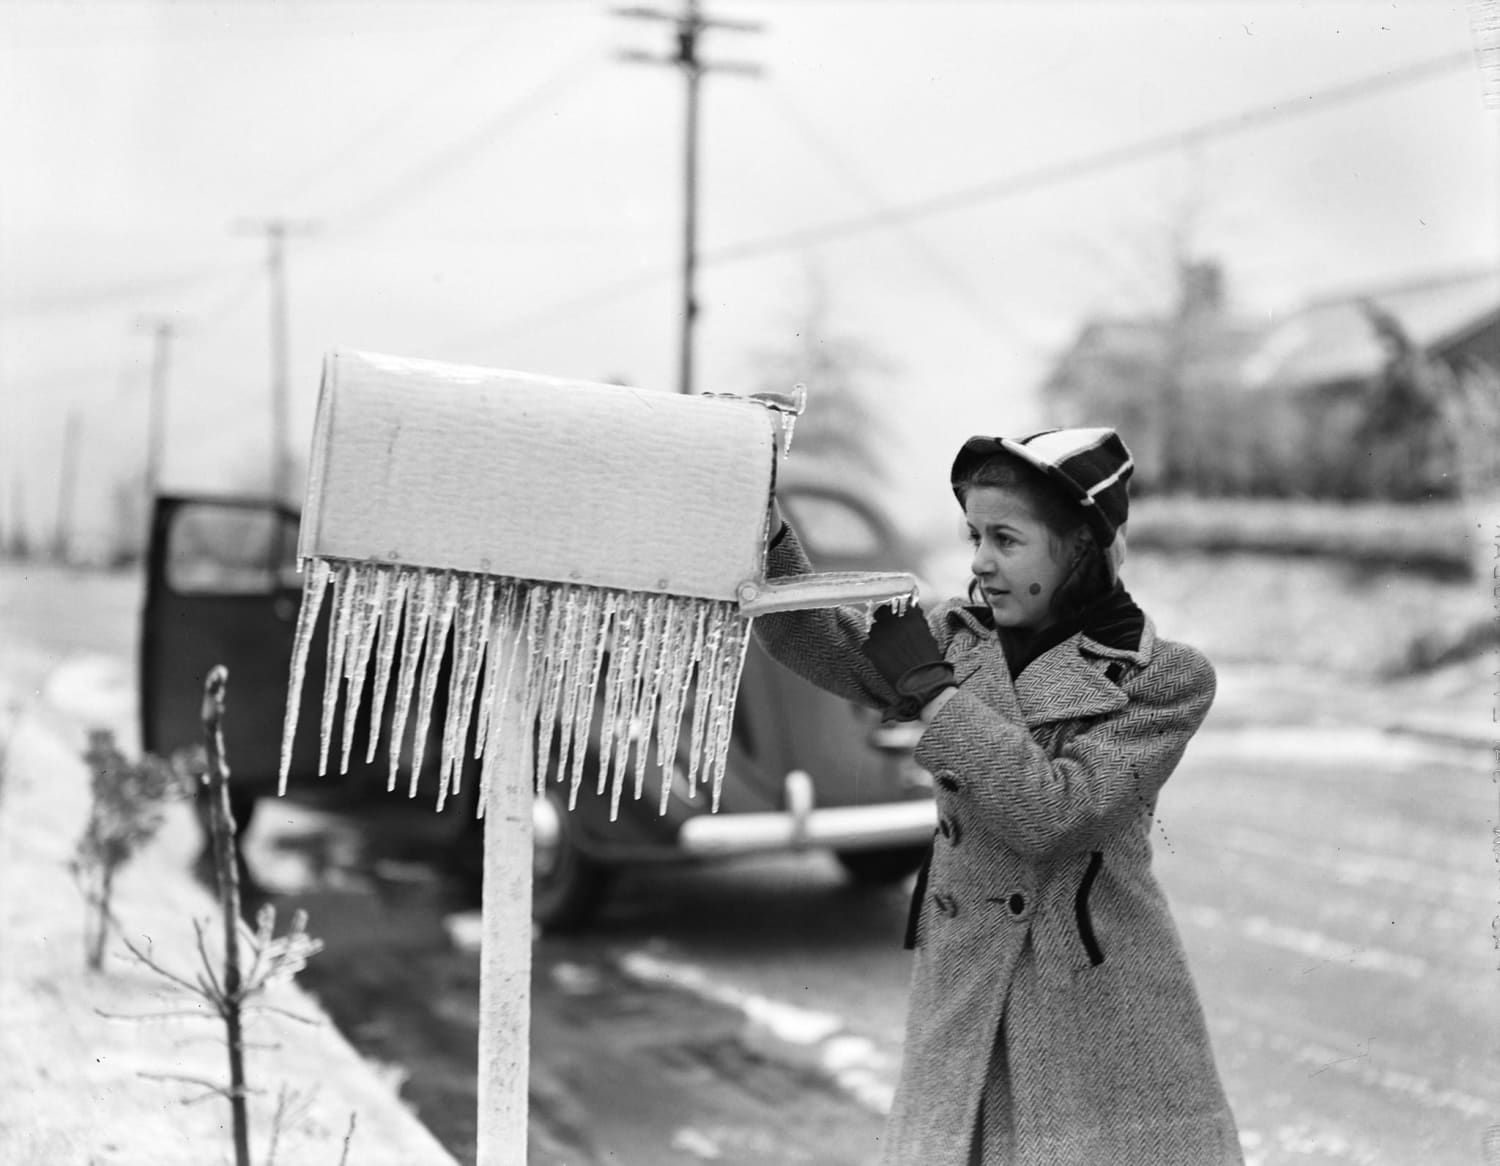 Checking the mailbox after an ice storm in Atlanta, 1940